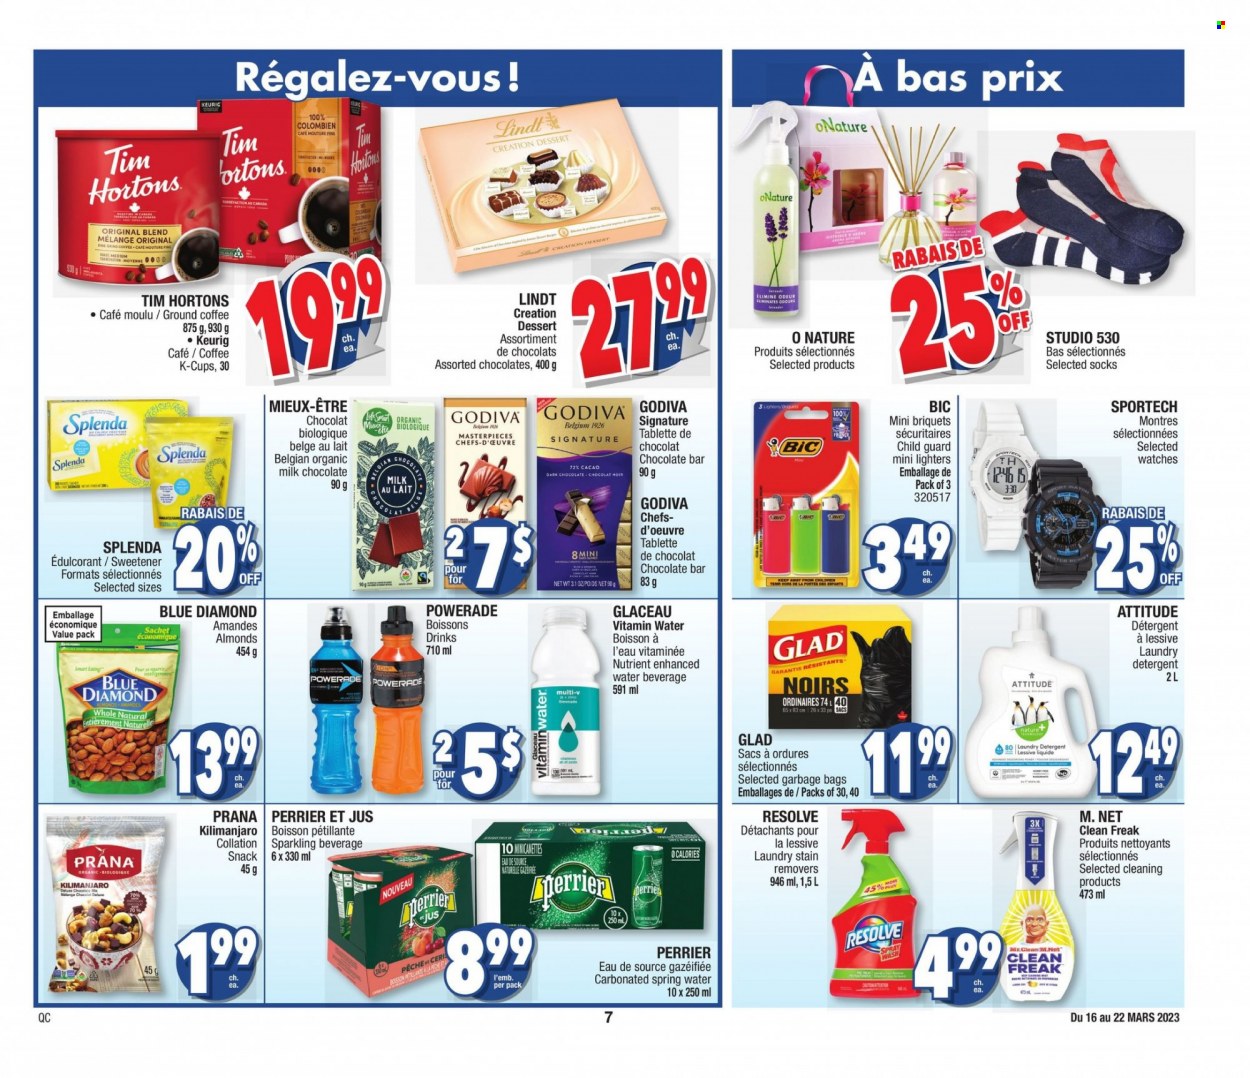 thumbnail - Jean Coutu Flyer - March 16, 2023 - March 22, 2023 - Sales products - milk chocolate, Mars, Godiva, dark chocolate, chocolate bar, sweetener, almonds, Blue Diamond, Powerade, Perrier, spring water, vitamin water, water, coffee, ground coffee, coffee capsules, K-Cups, Keurig, laundry detergent, BIC, bag, socks, watch, detergent, Lindt. Page 7.